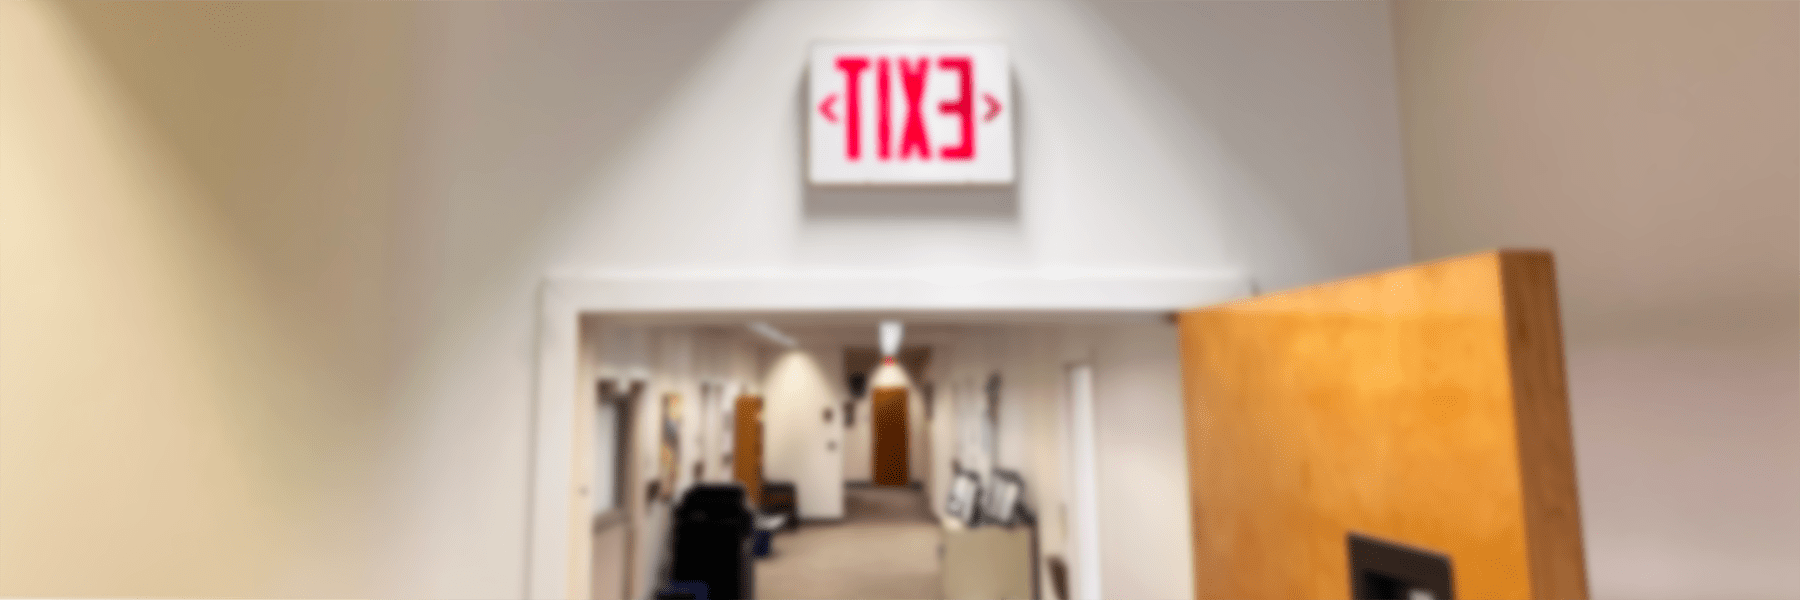 Blurred image of exit sign in hallway